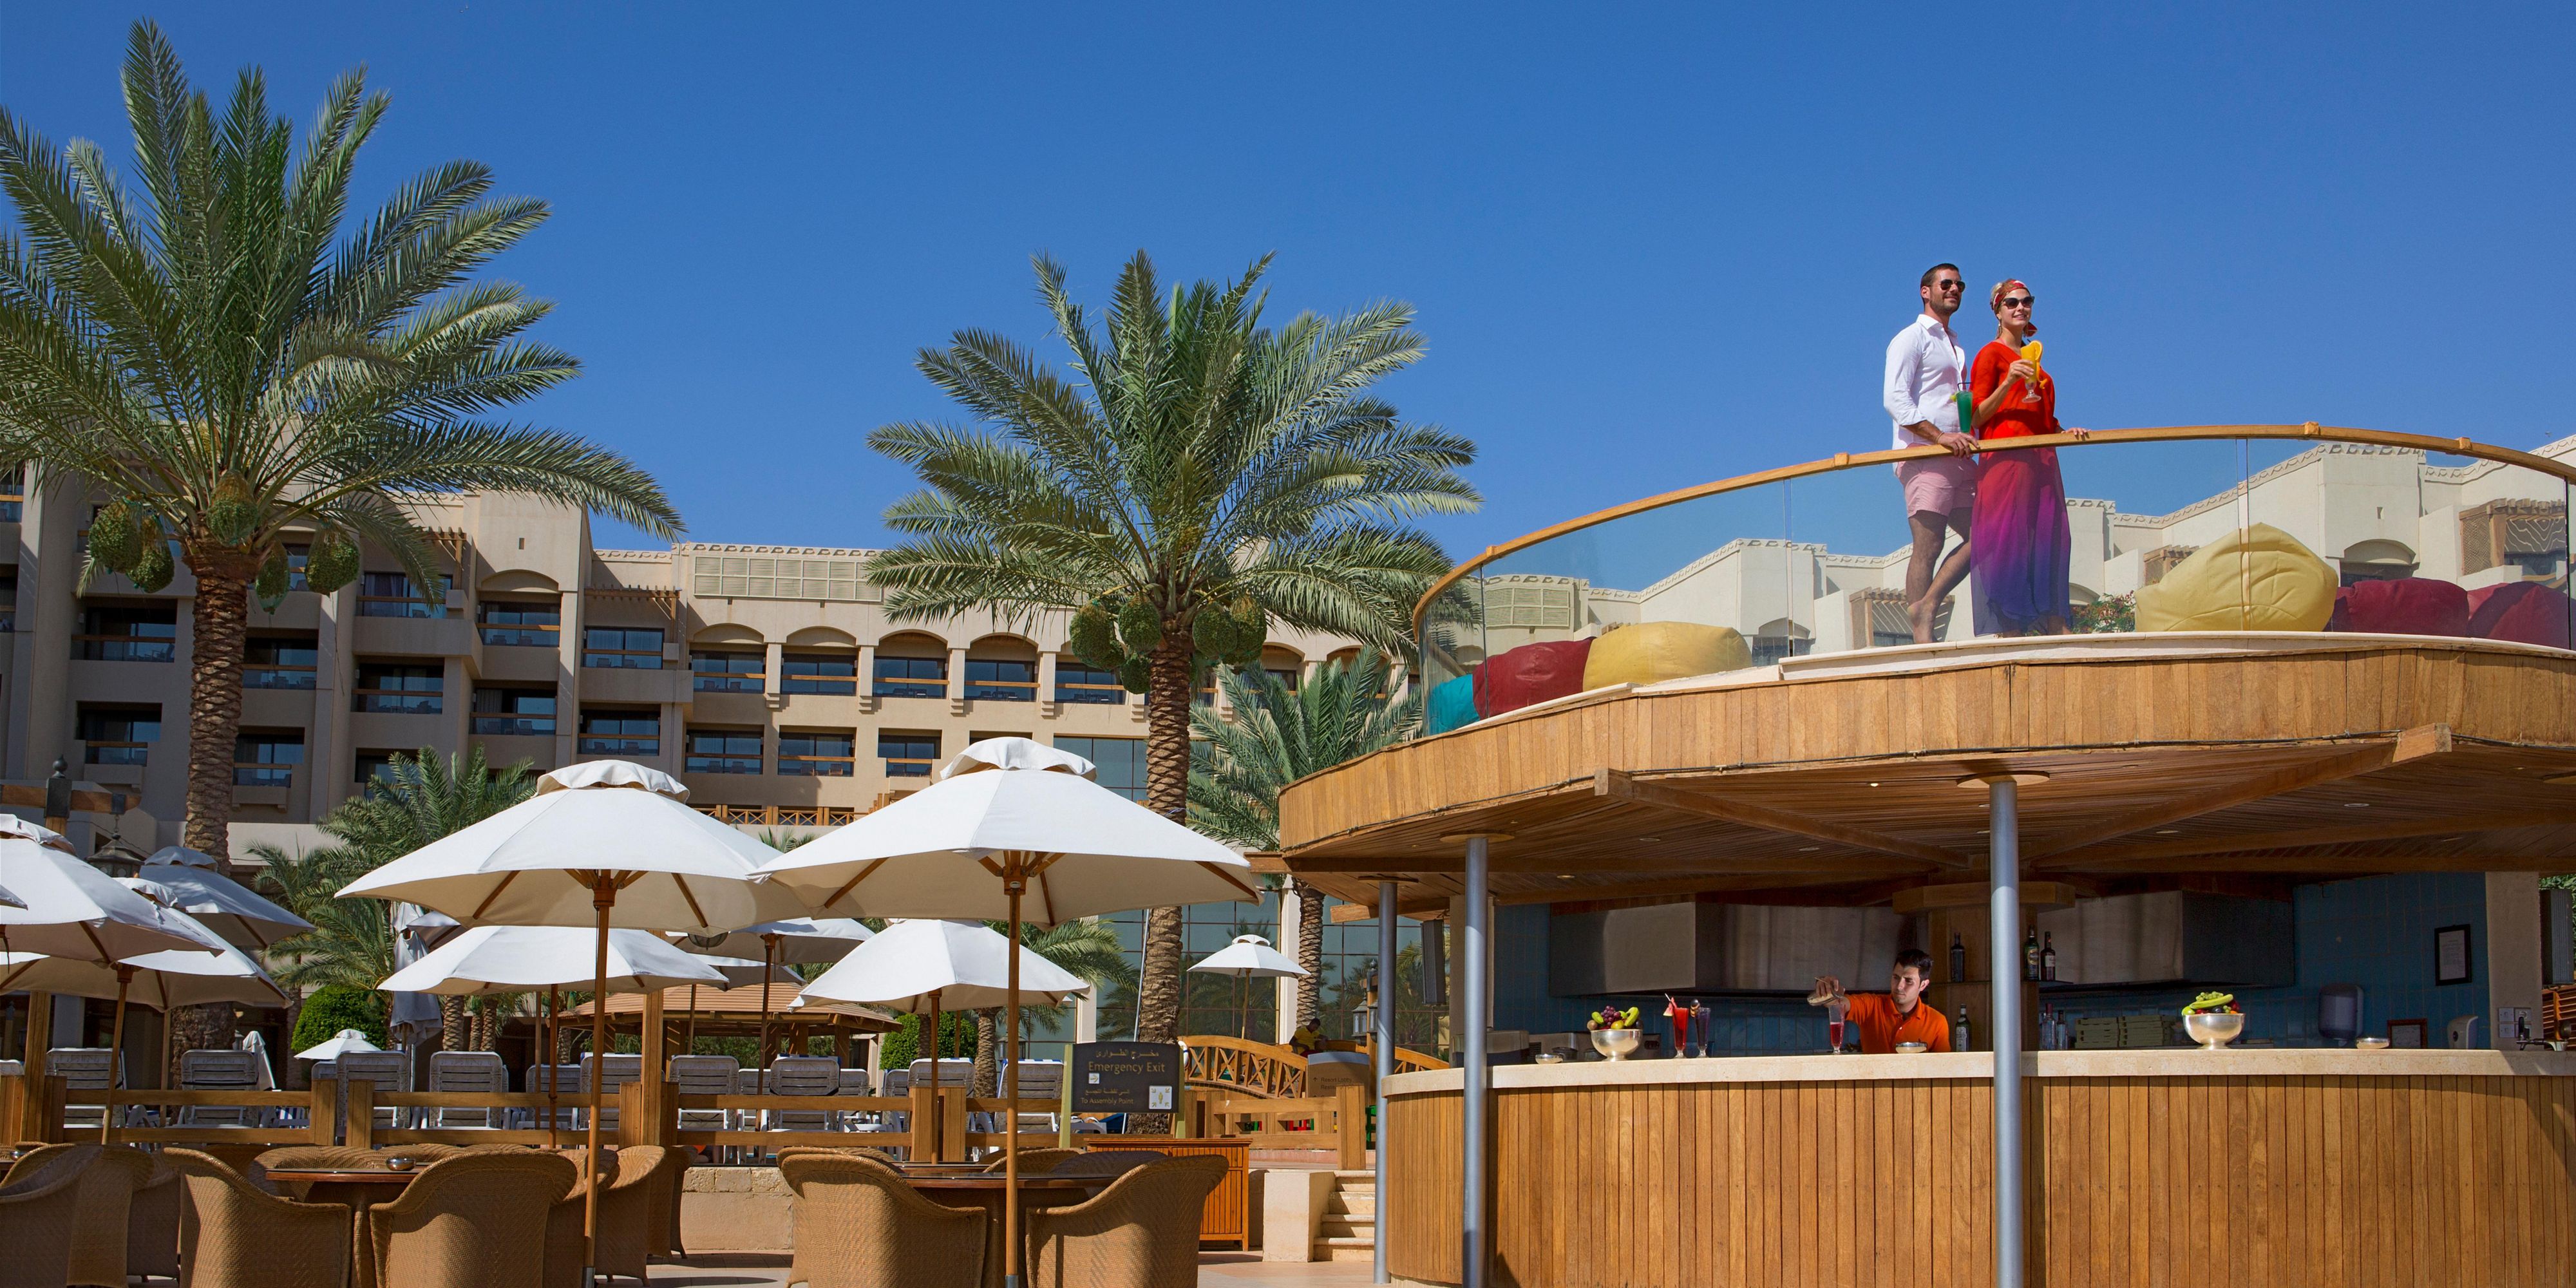 Offering picture perfect views of the Red Sea and mountains, this outdoor bar is a great spot to unwind over snacks and chilled drinks. Cool down by treating yourself to some ice cream or a cool cocktail by the beach.